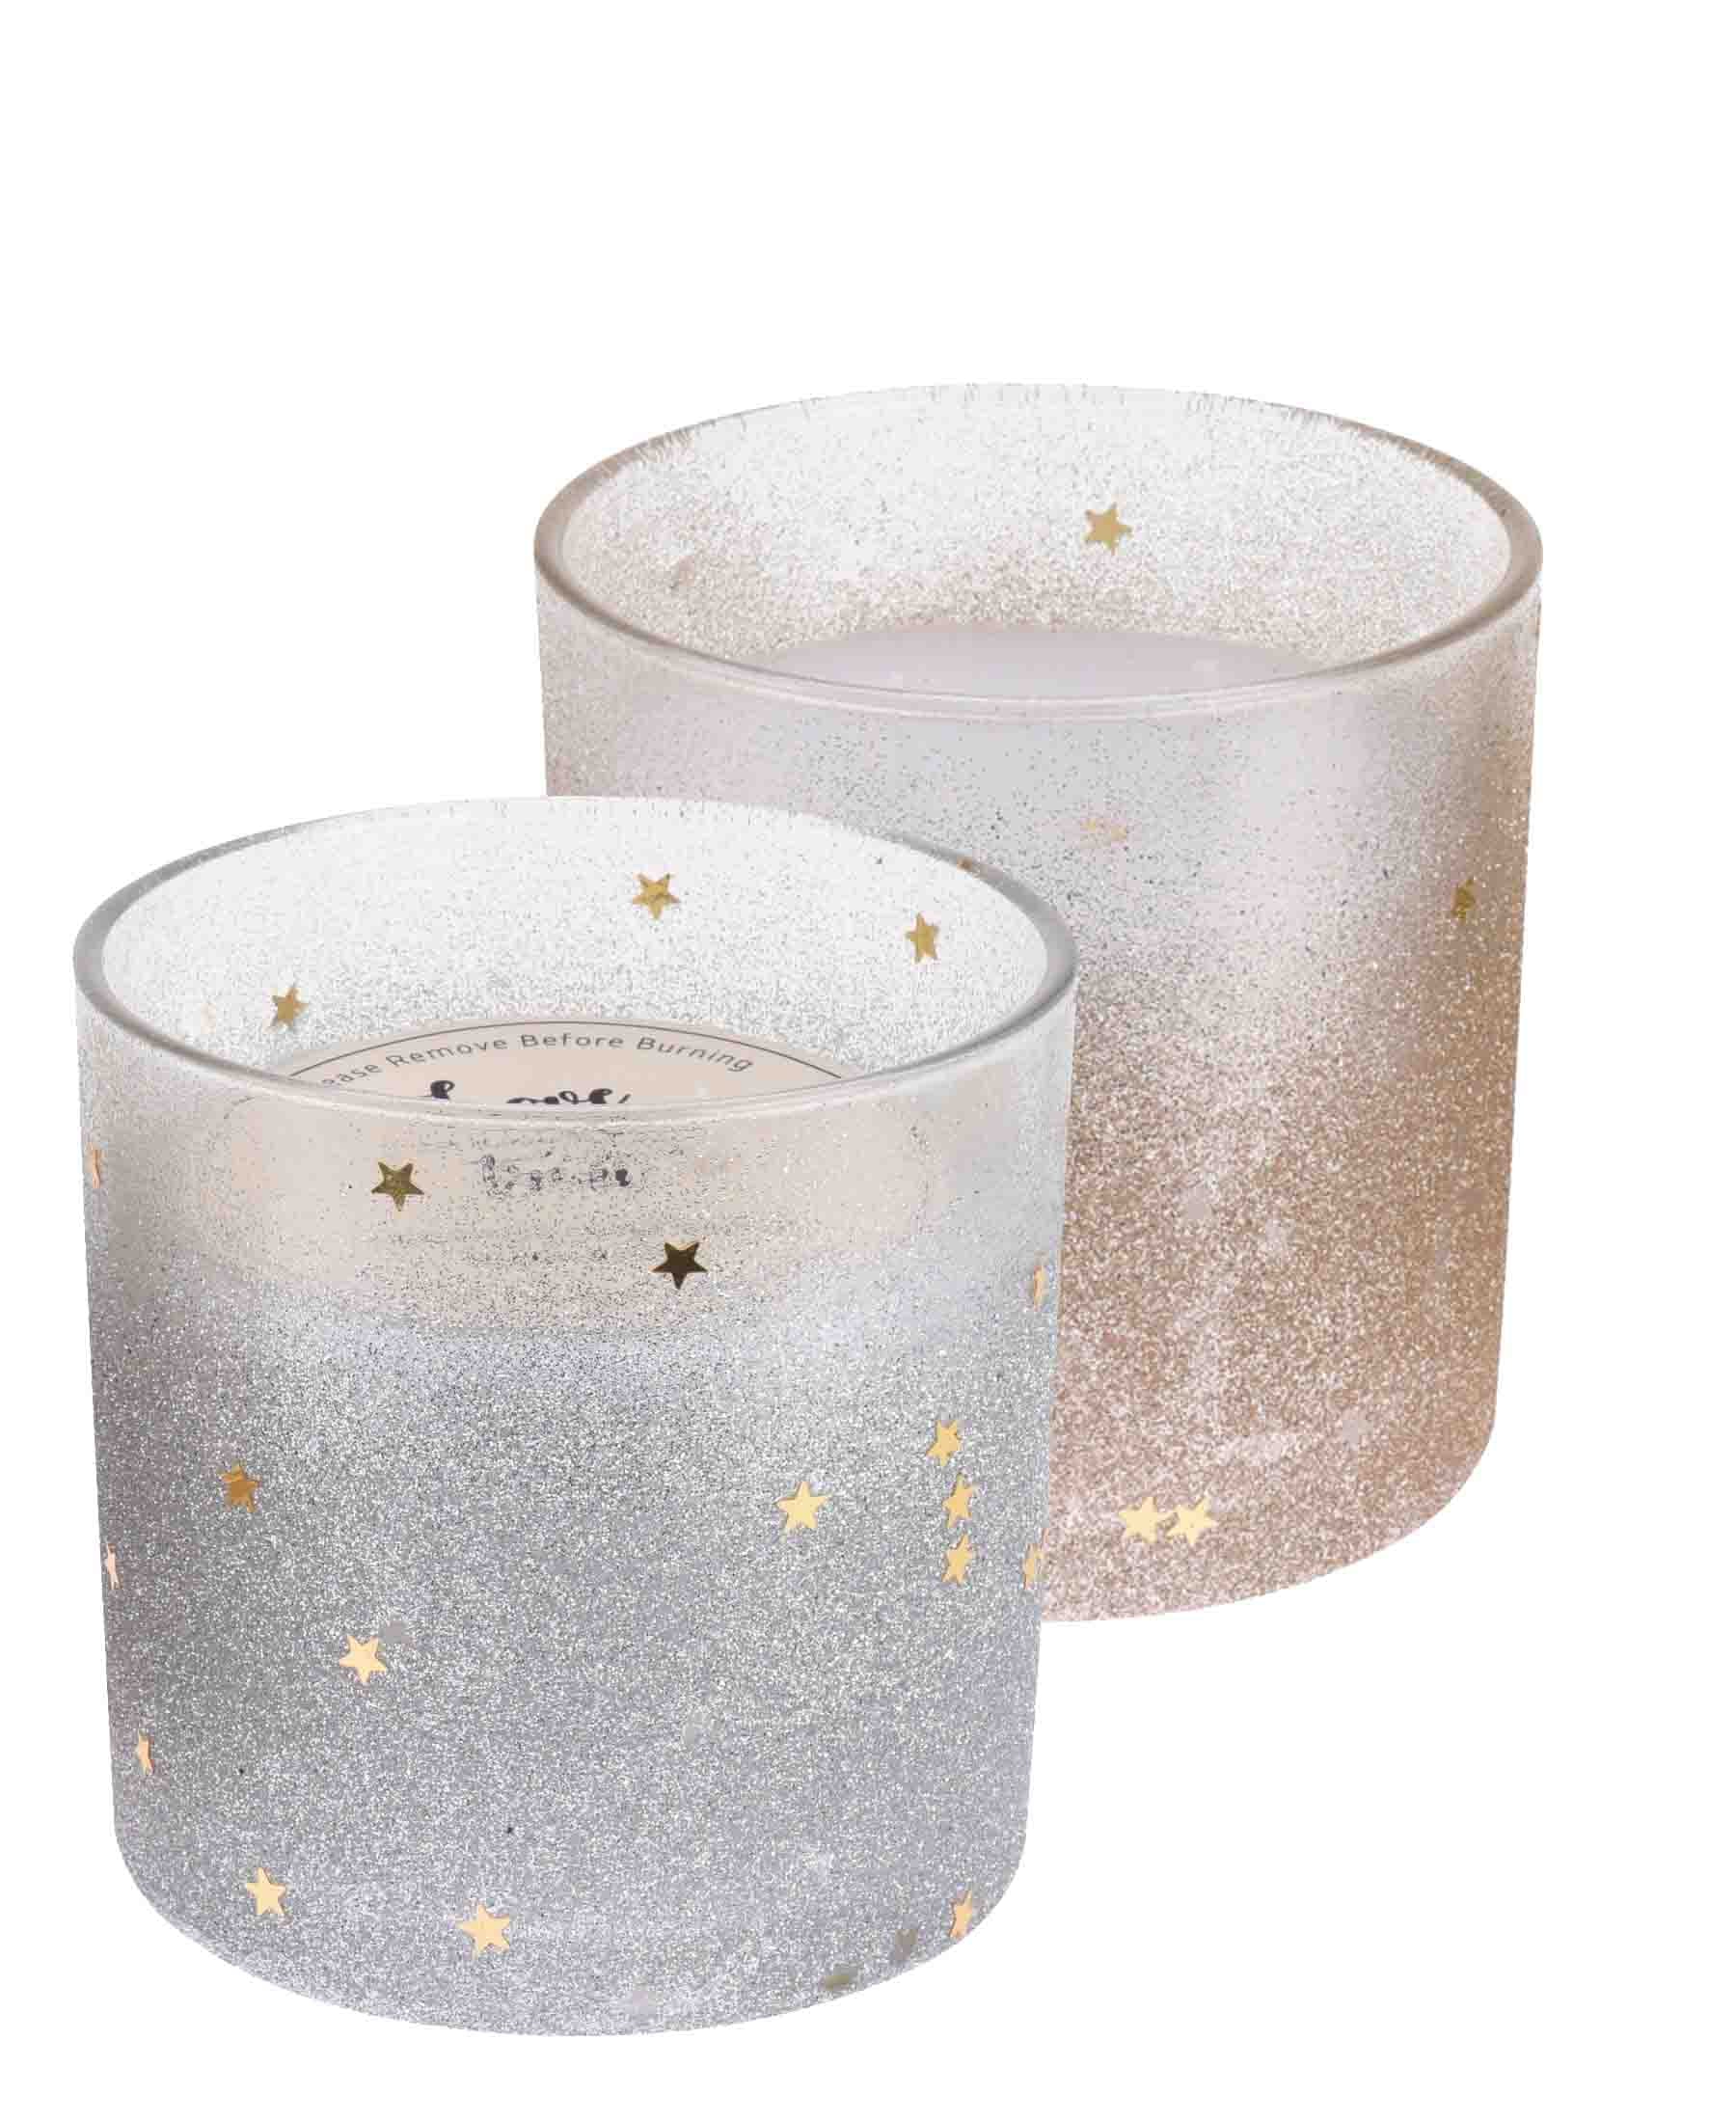 Home & Styling 10cm Christmas Deco Candle - Silver